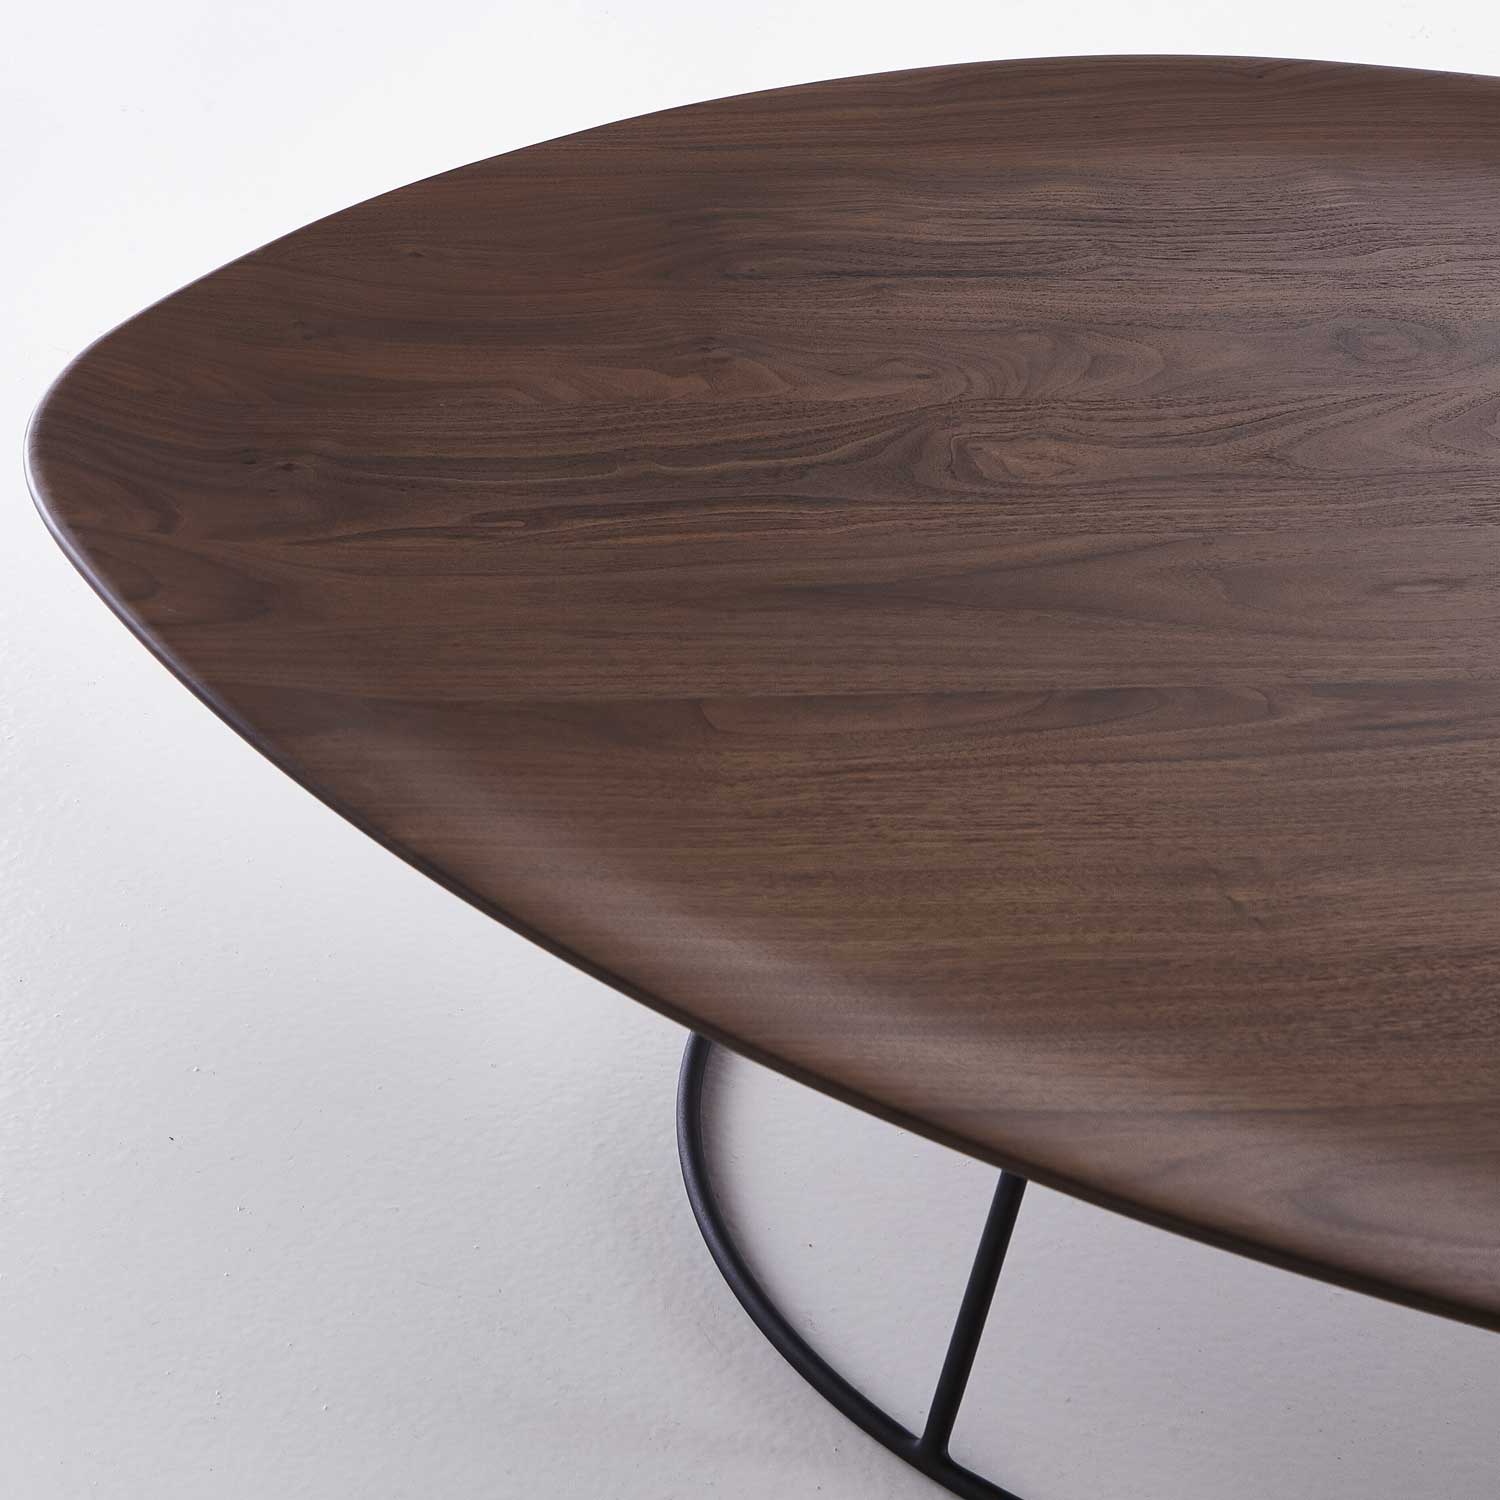 Image Low table concave top  5